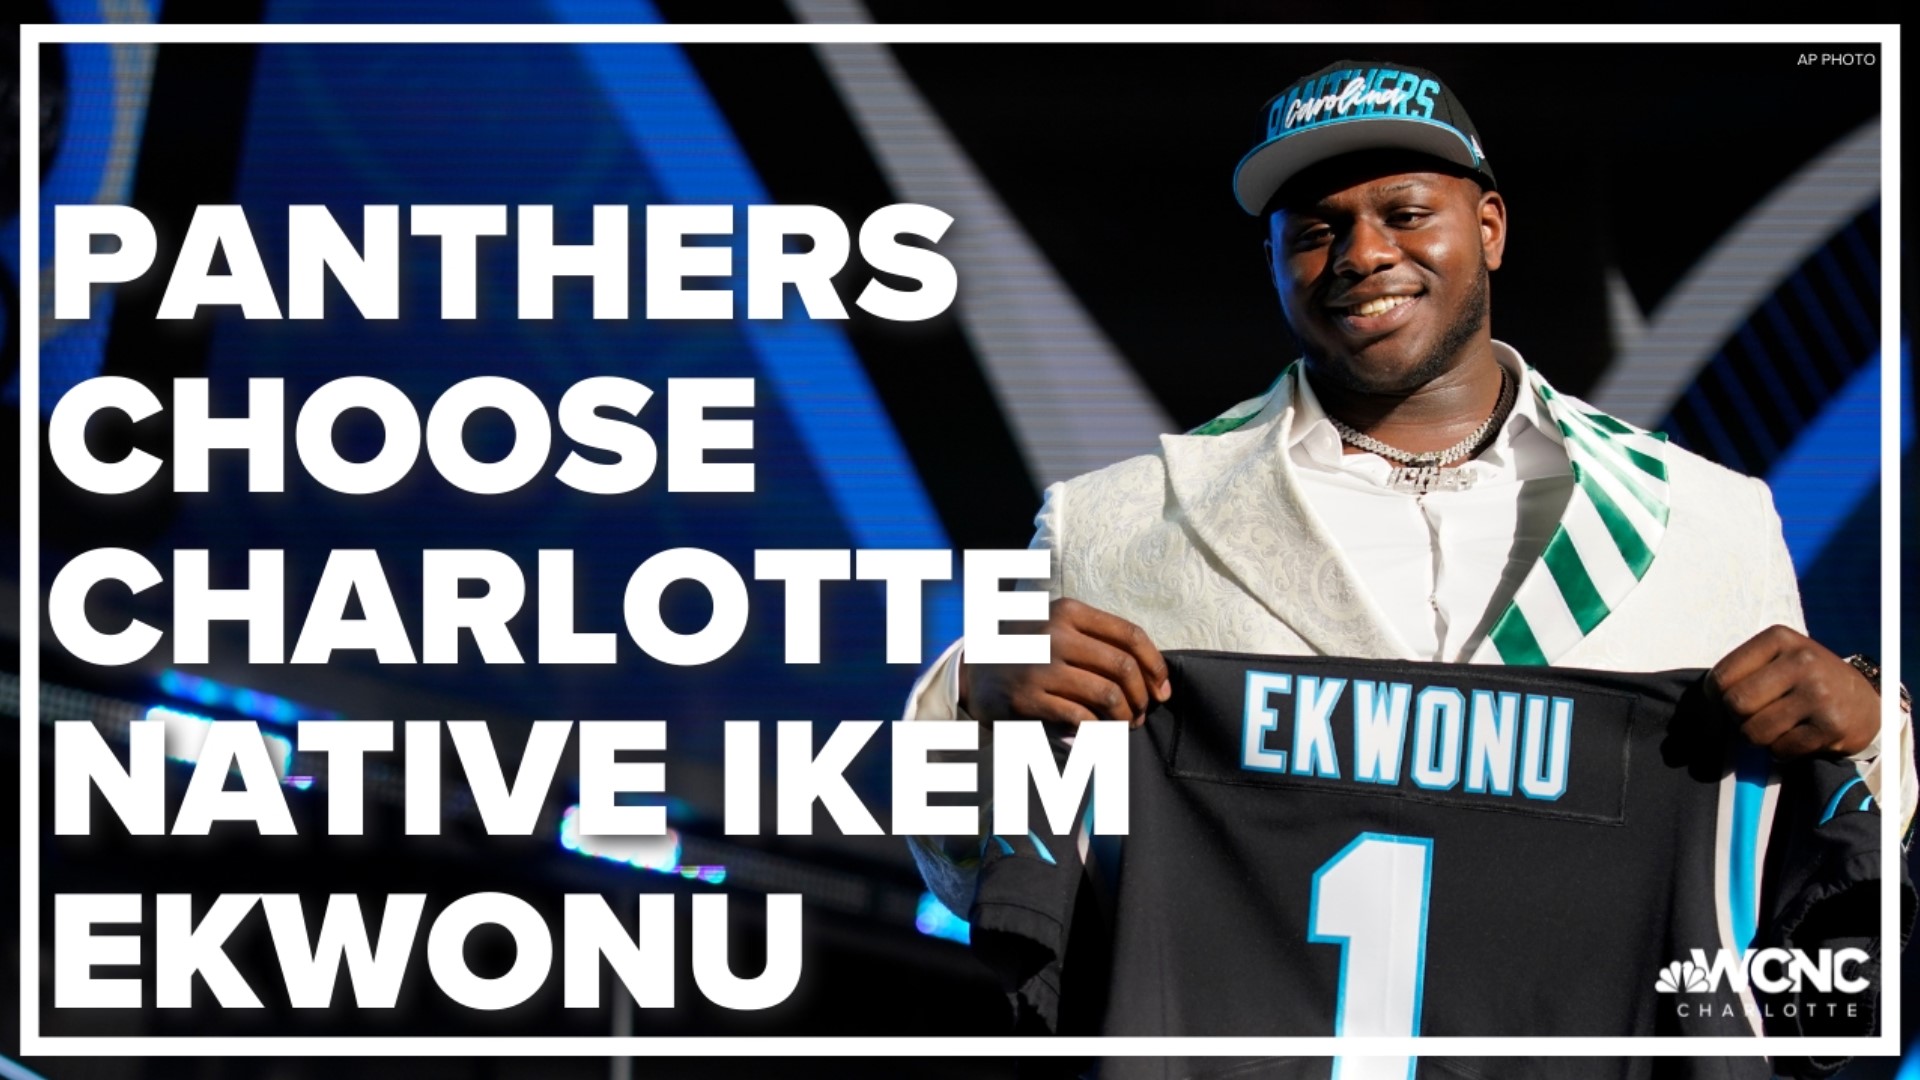 North Carolina State’s Ikem Ekwonu, considered the premier blocker in this draft, has been selected sixth in the first round by quarterback-hungry Carolina.